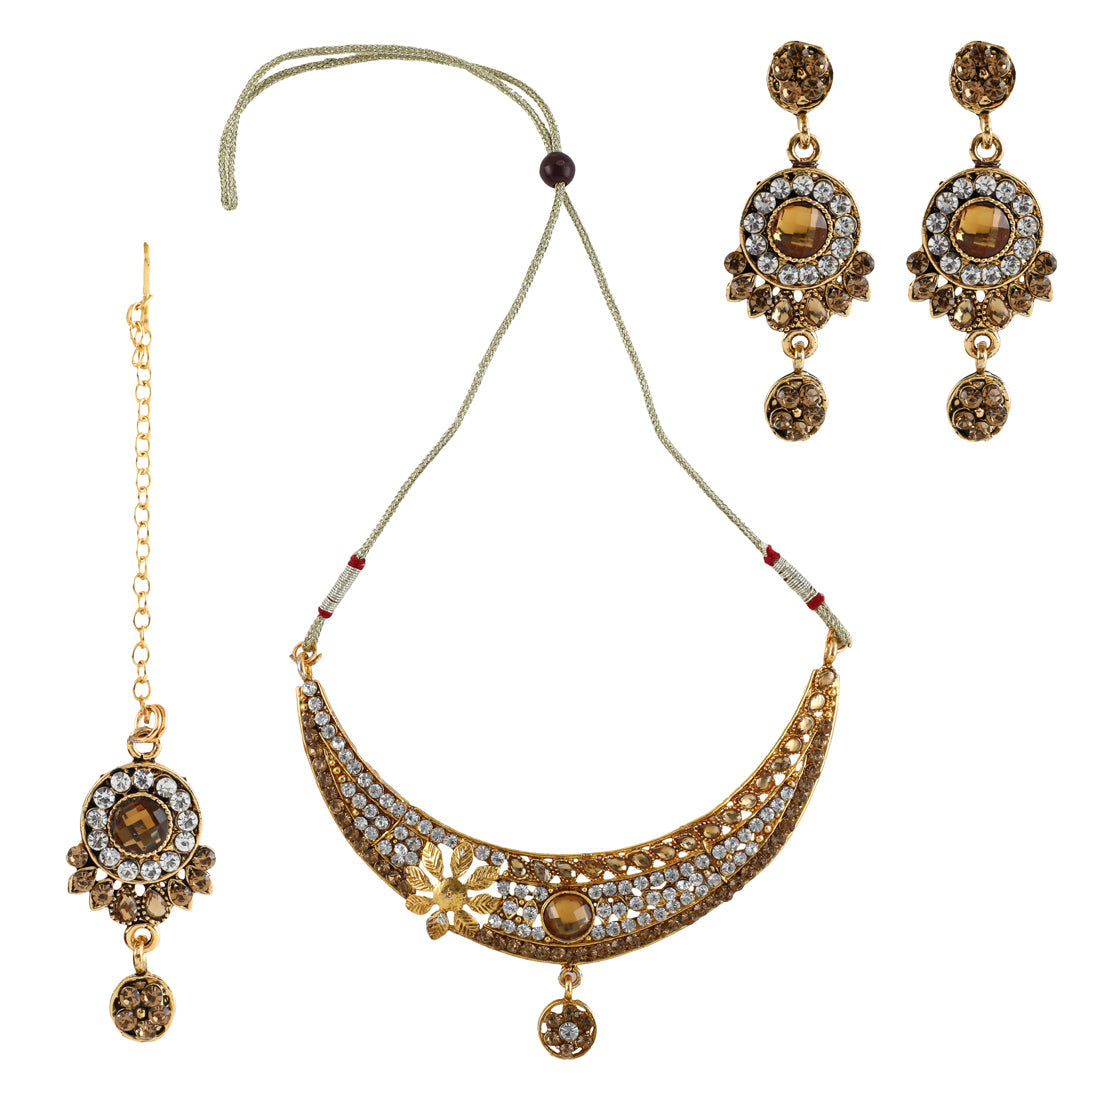 Gold Plated Complete Jewellery Bridal Necklace Set with Maang tikka and Earrings for Women (SJ_2748)